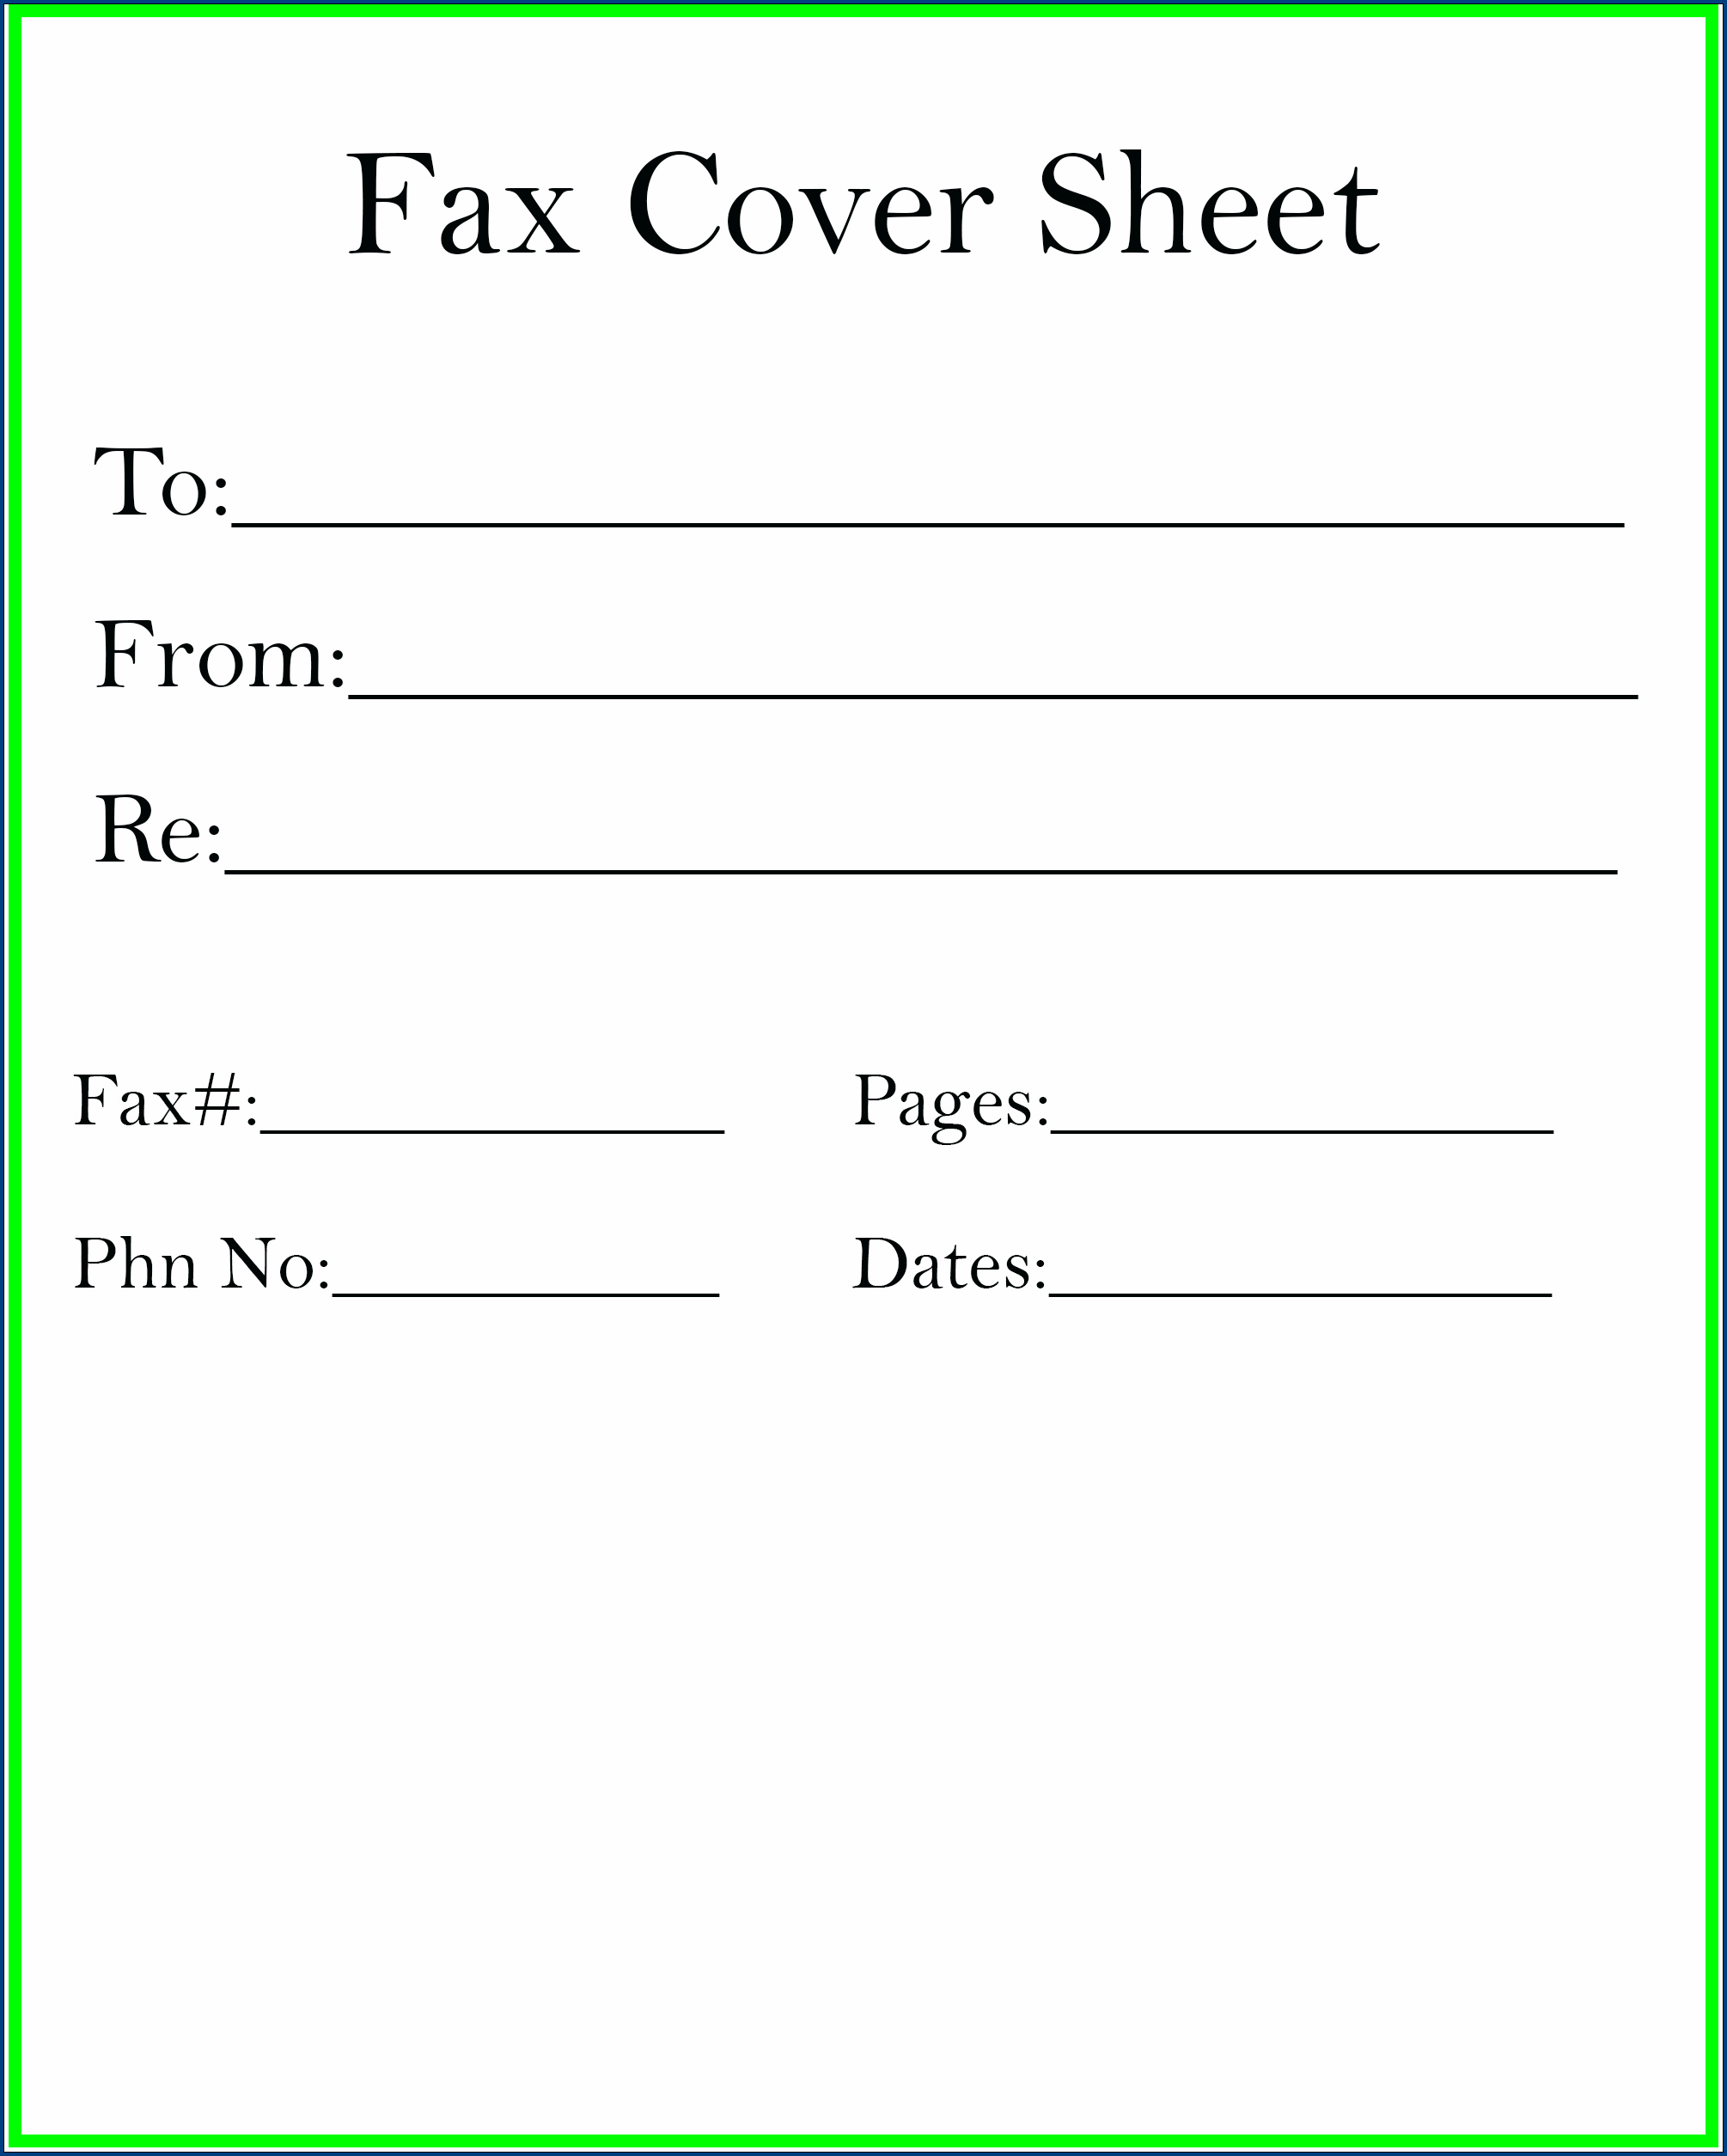 Free Fax Cover Sheet Template Open Office